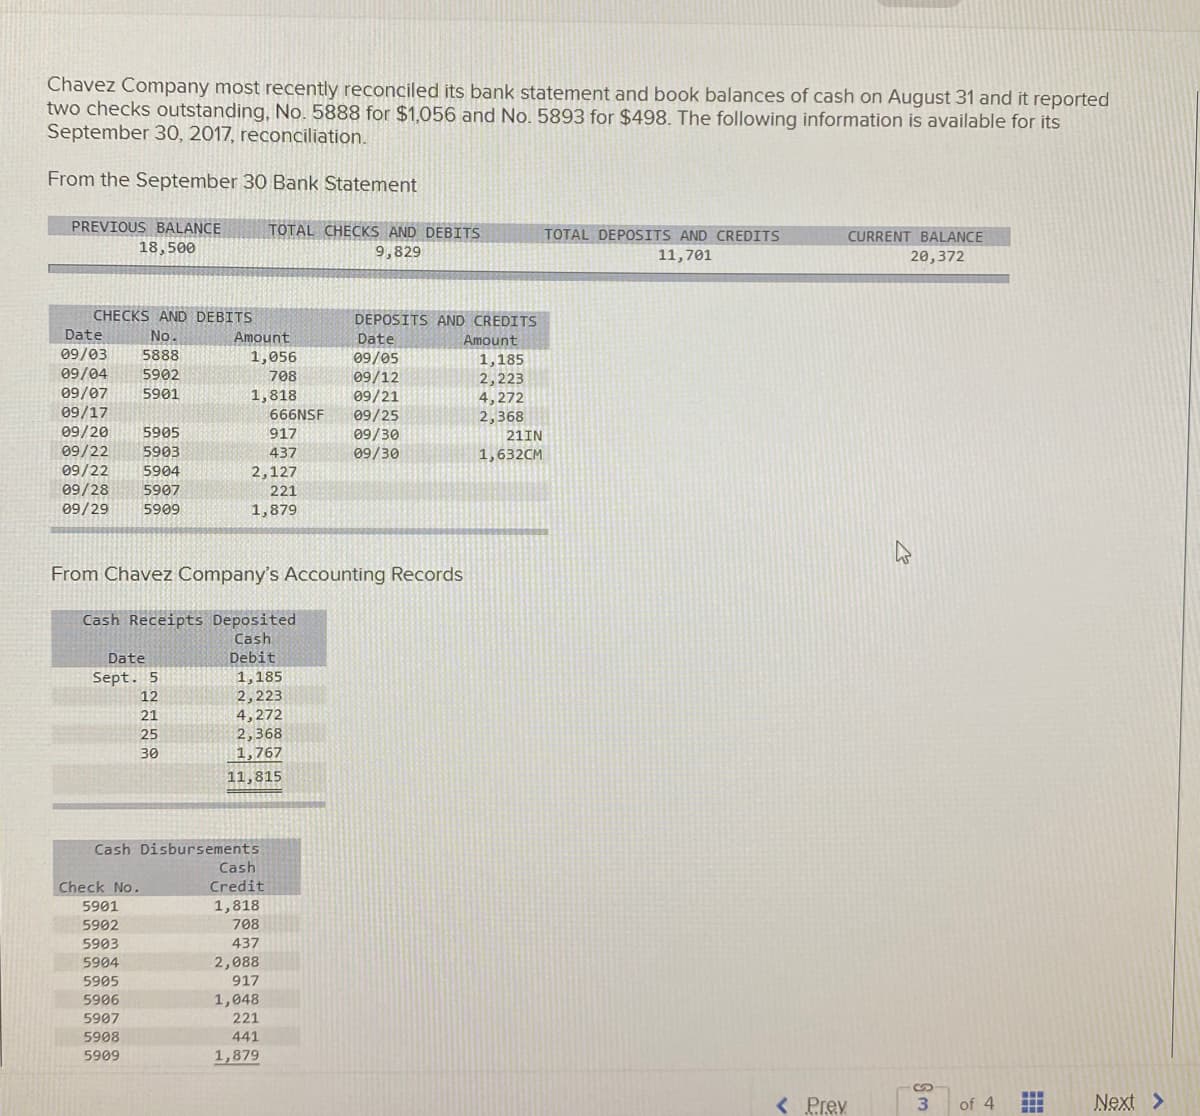 Chavez Company most recently reconciled its bank statement and book balances of cash on August 31 and it reported
two checks outstanding, No. 5888 for $1,056 and No. 5893 for $498. The following information is available for its
September 30, 2017, reconciliation.
From the September 30 Bank Statement
PREVIOUS BALANCE
TOTAL CHECKS AND DEBITS
TOTAL DEPOSITS AND CREDITS
CURRENT BALANCE
18,500
9,829
11,701
20,372
CHECKS AND DEBITS
Date
DEPOSITS AND CREDITS
No.
Amount
Date
Amount
09/03
5888
1,056
09/05
09/12
09/21
09/25
09/30
09/30
1,185
2,223
4,272
2,368
09/04
5902
708
09/07
09/17
5901
1,818
666NSF
09/20
5905
917
21IN
09/22
5903
437
1,632CM
09/22
09/28
09/29
5904
2,127
5907
221
5909
1,879
From Chavez Company's Accounting Records
Cash Receipts Deposited
Cash
Date
Debit
Sept. 5
1,185
12
2,223
21
4,272
25
2,368
30
1,767
11,815
Cash Disbursements
Cash
Credit
Check No.
5901
1,818
5902
708
5903
437
5904
2,088
5905
917
5906
1,048
5907
221
5908
441
5909
1,879
%24
< Prev
3.
of 4
Next >
